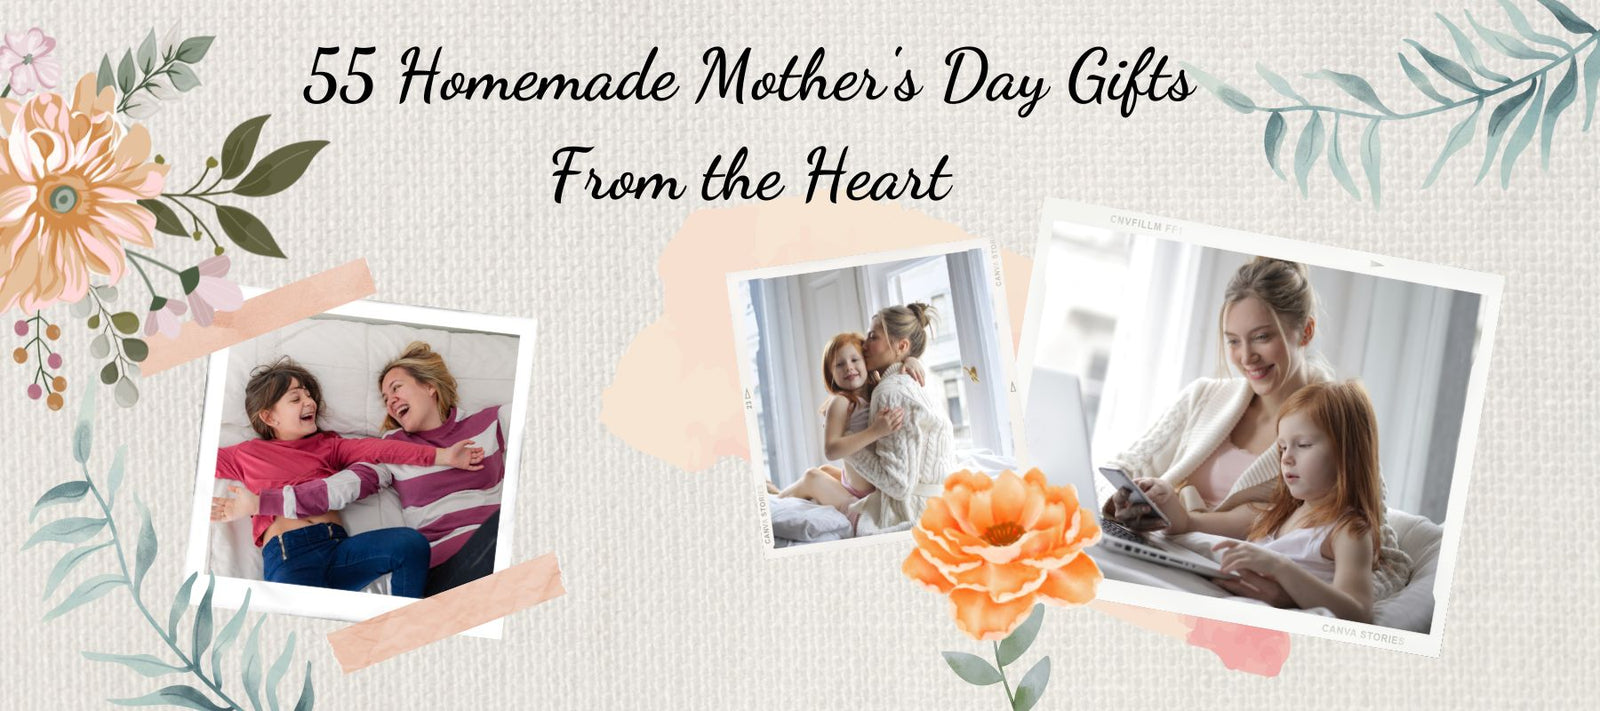 21 Mother's Day Homemade Gift Ideas — Sugar & Cloth